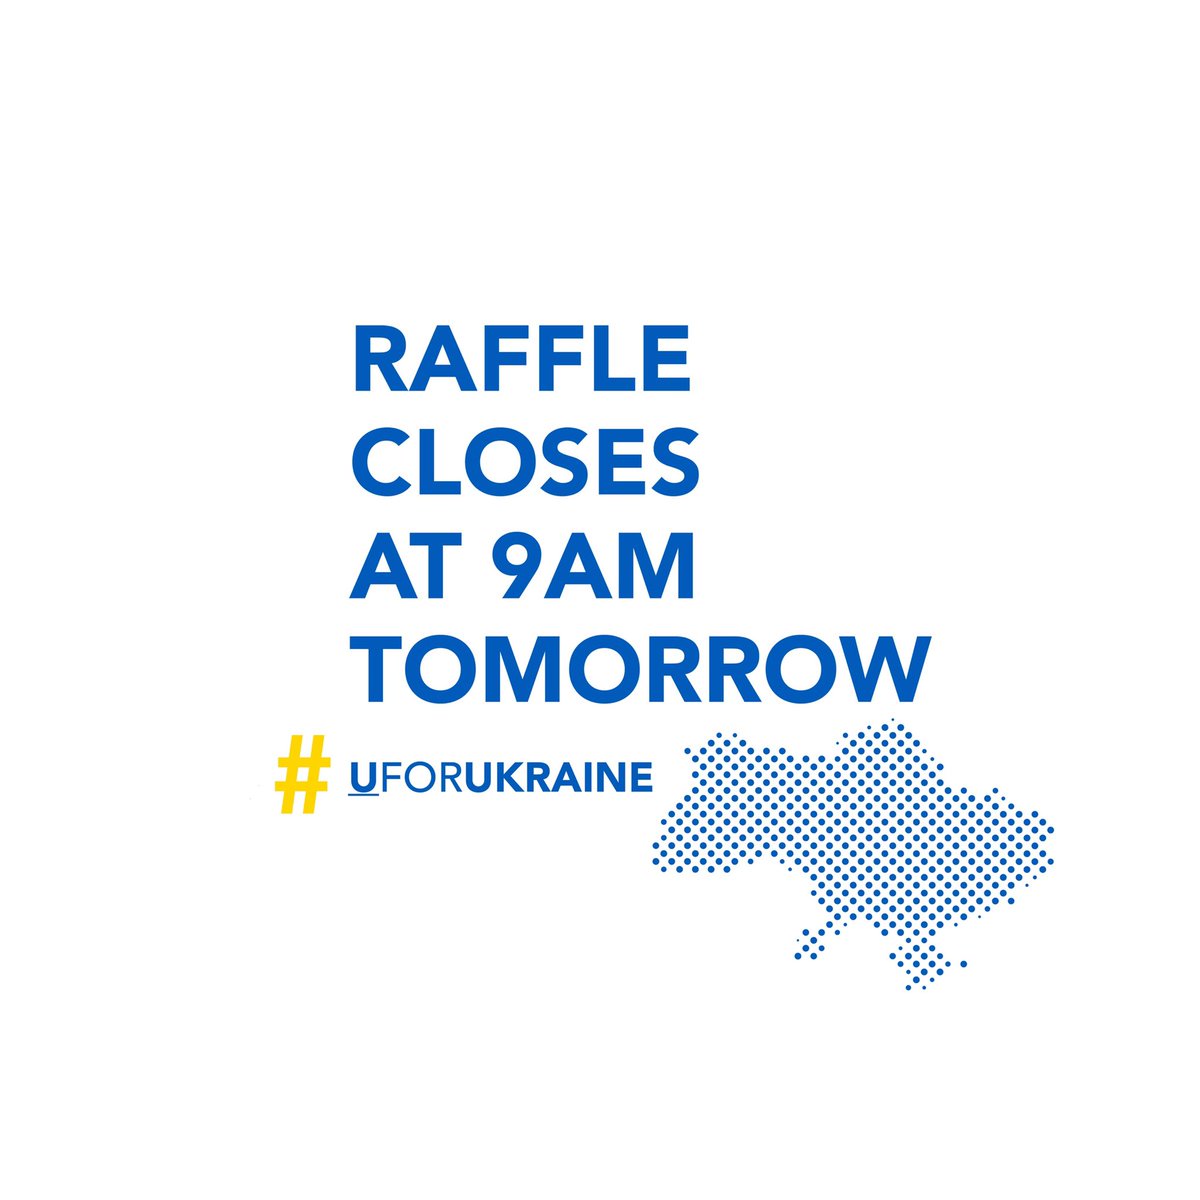 C L O S I N G - Last chance to support an amazing cause & bag yourself a goodie!! Raffle ticket sales close at 09.00 tomorrow. Winner announced tomorrow night by the one & only @donalskehan @alltawinterhouse ! Loads of love, Peter, Frank & Cloud Picker team. Xx #uforukraine